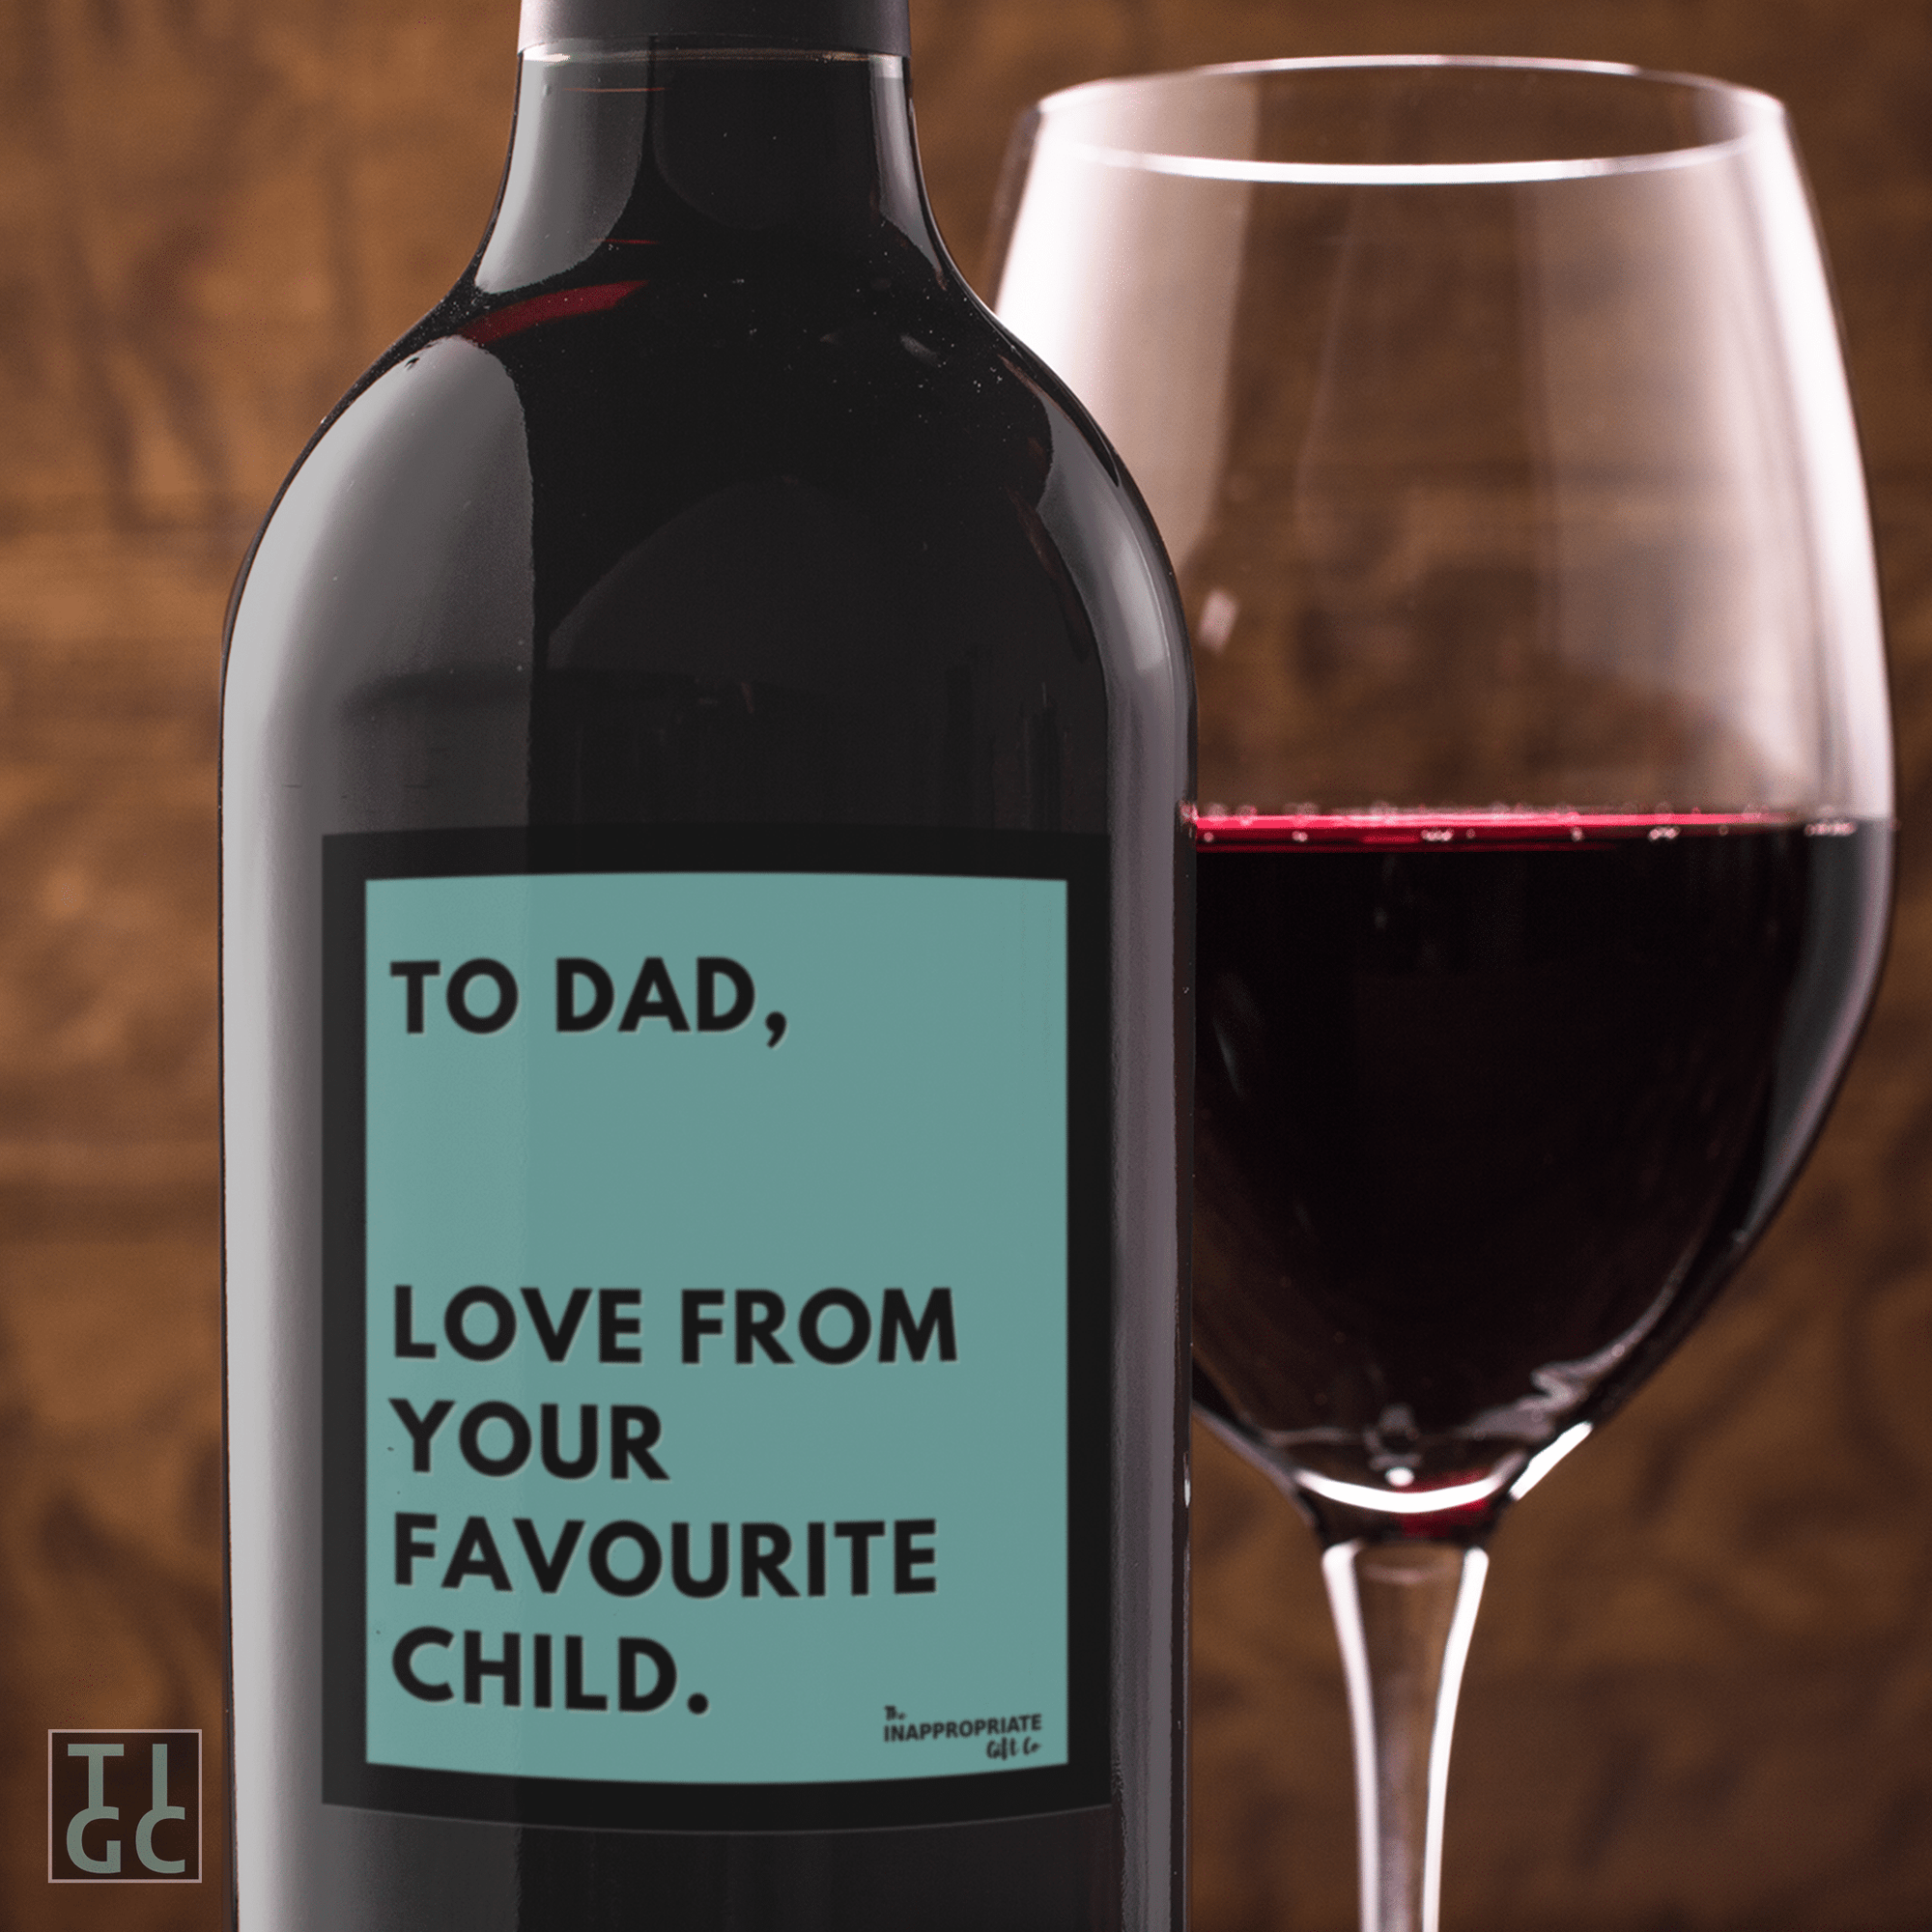 TIGC The Inappropriate Gift Co To Dad, Love from your favourite child wine label (Digital Download Only)